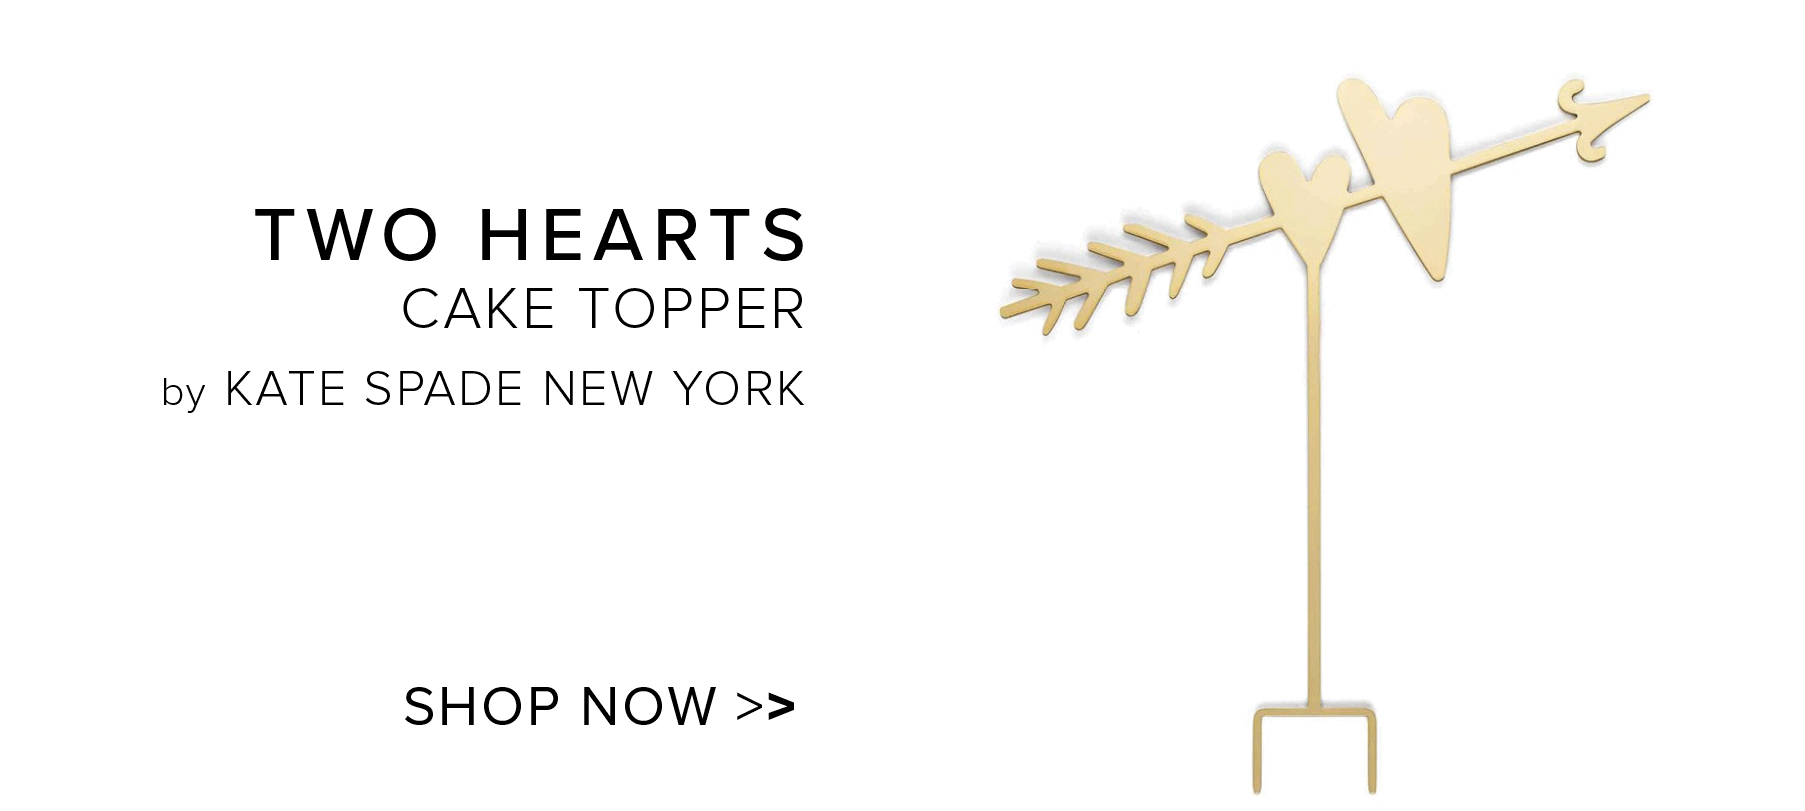  TWO HEARTS 5N CAKE TOPPER Wf N by KATE SPADE NEW YORK SHOP NOW 